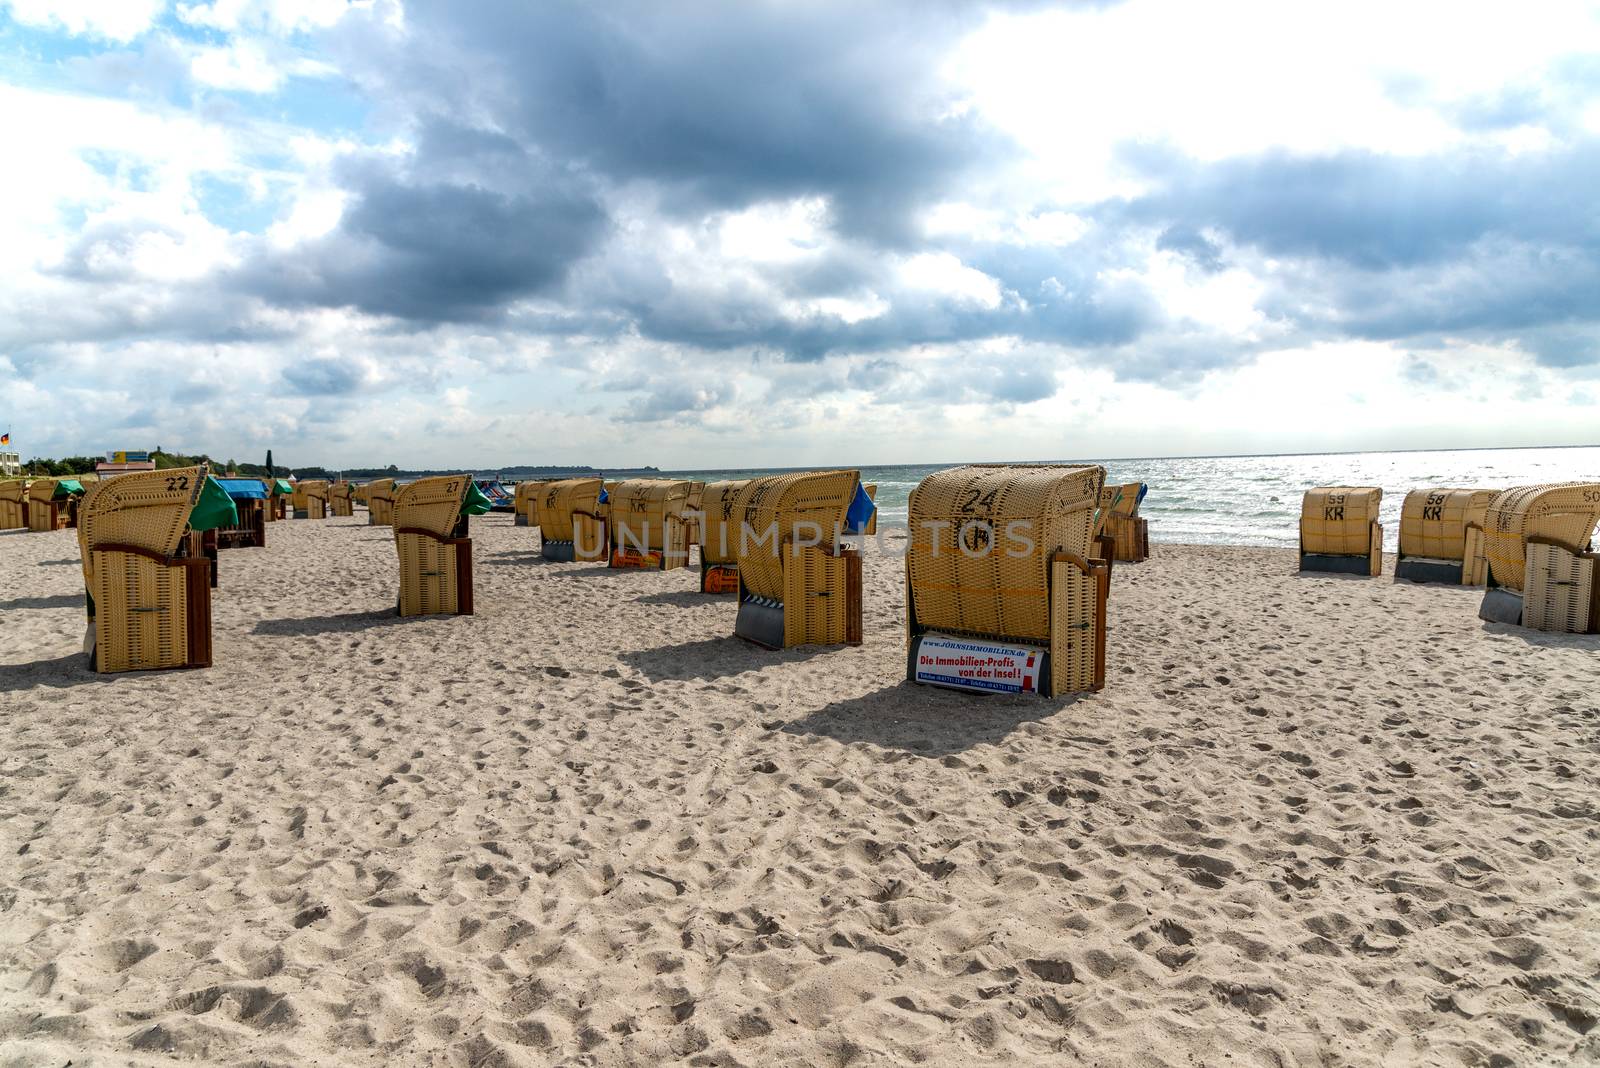 Fehmarn, Schleswig-Holstein/Germany - 05.09.2019: Beach on Fehmarn in Germany with many beach chairs on the beach and the Baltic Sea in the background with light-dark cloudy sky.